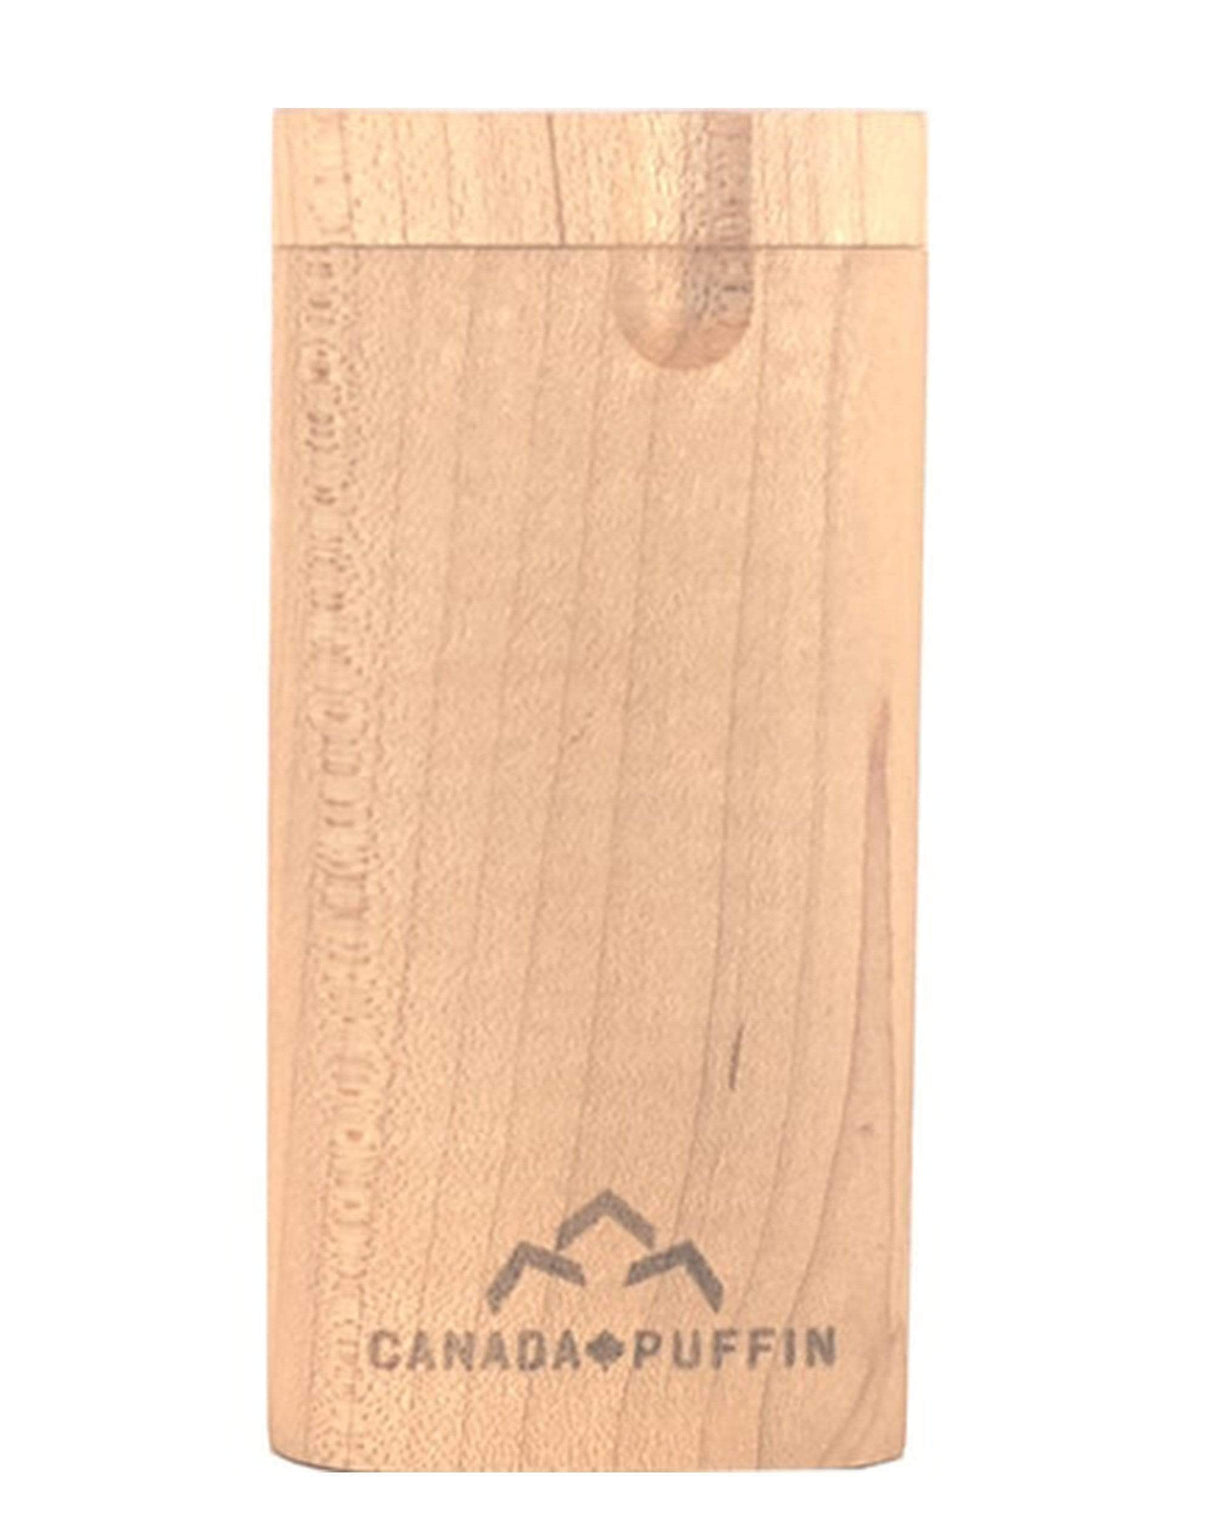 Canada Puffin Banff Wooden Dugout with One Hitter, Compact and Portable Design, Front View